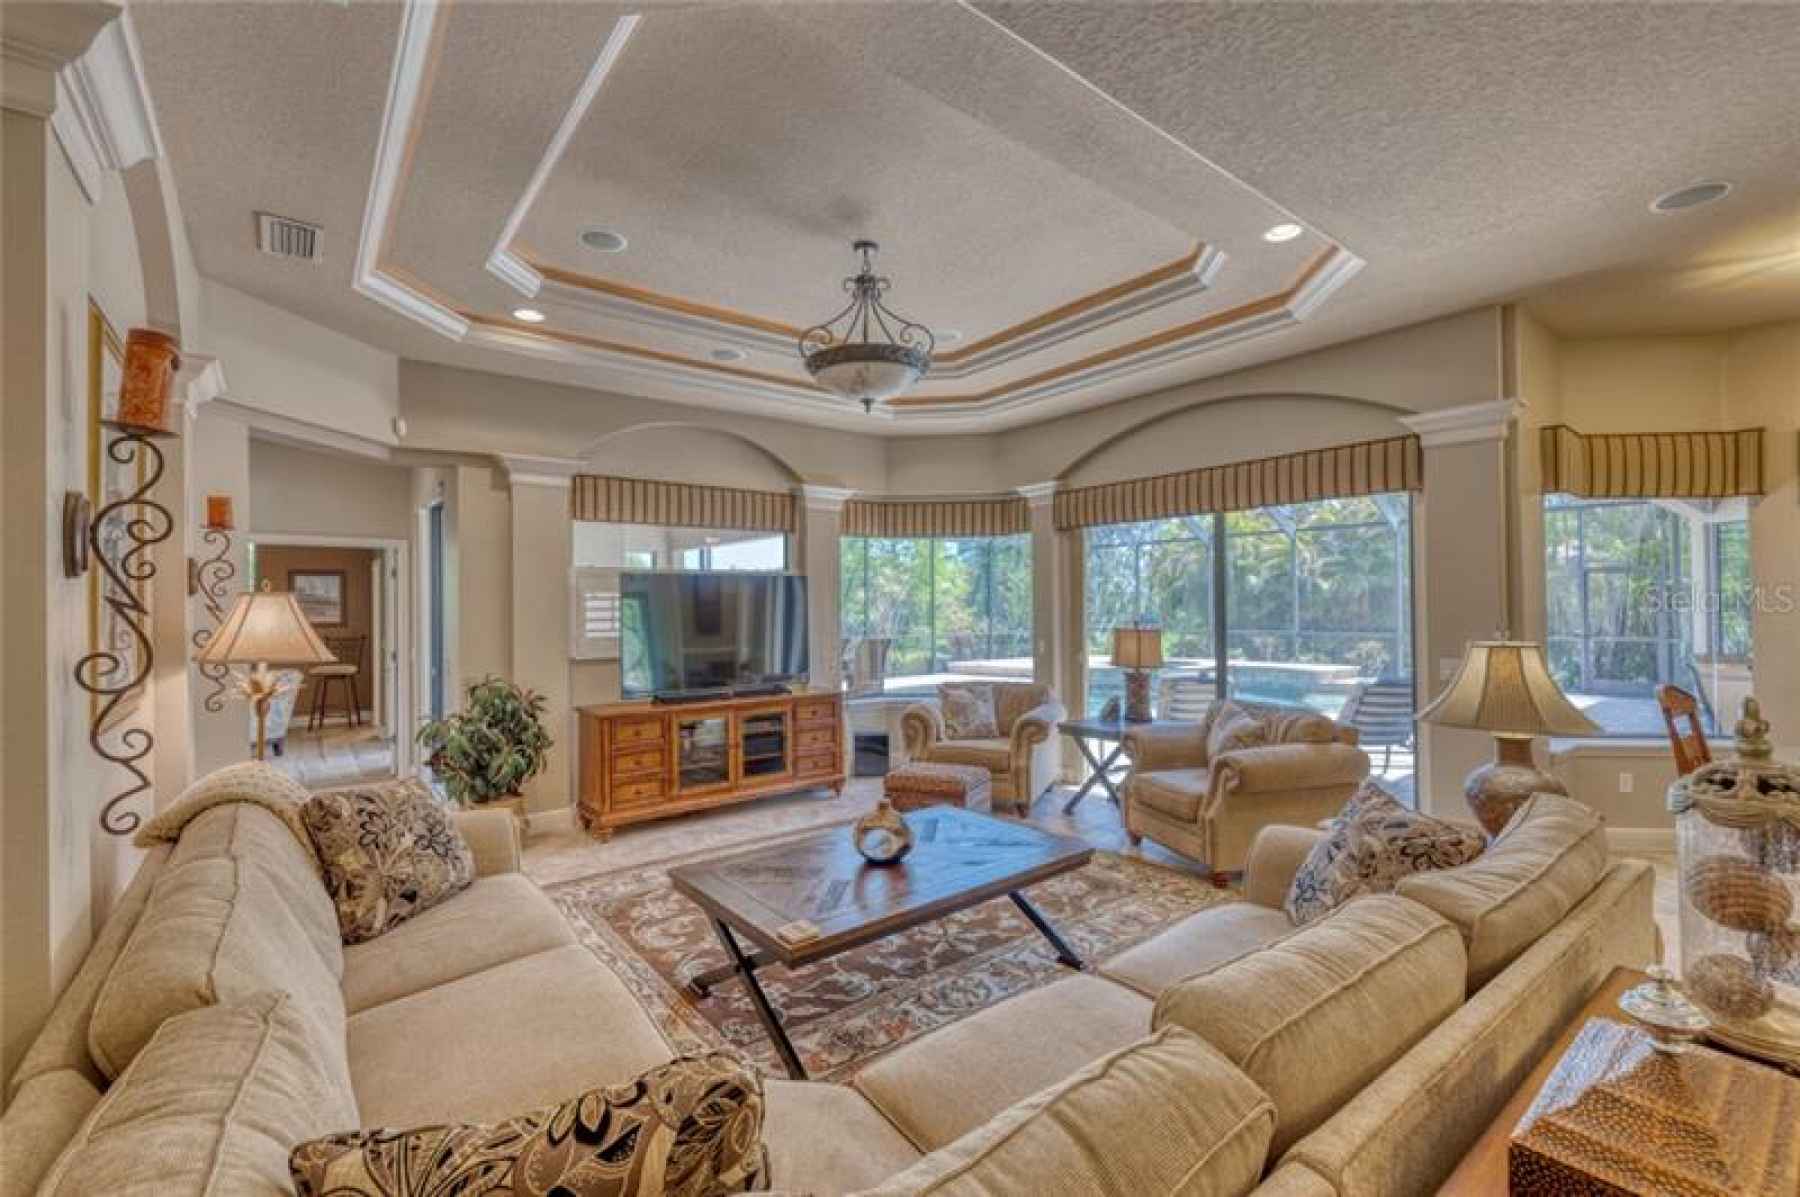 Large, open concept Family Room looking out over the pool and pond.